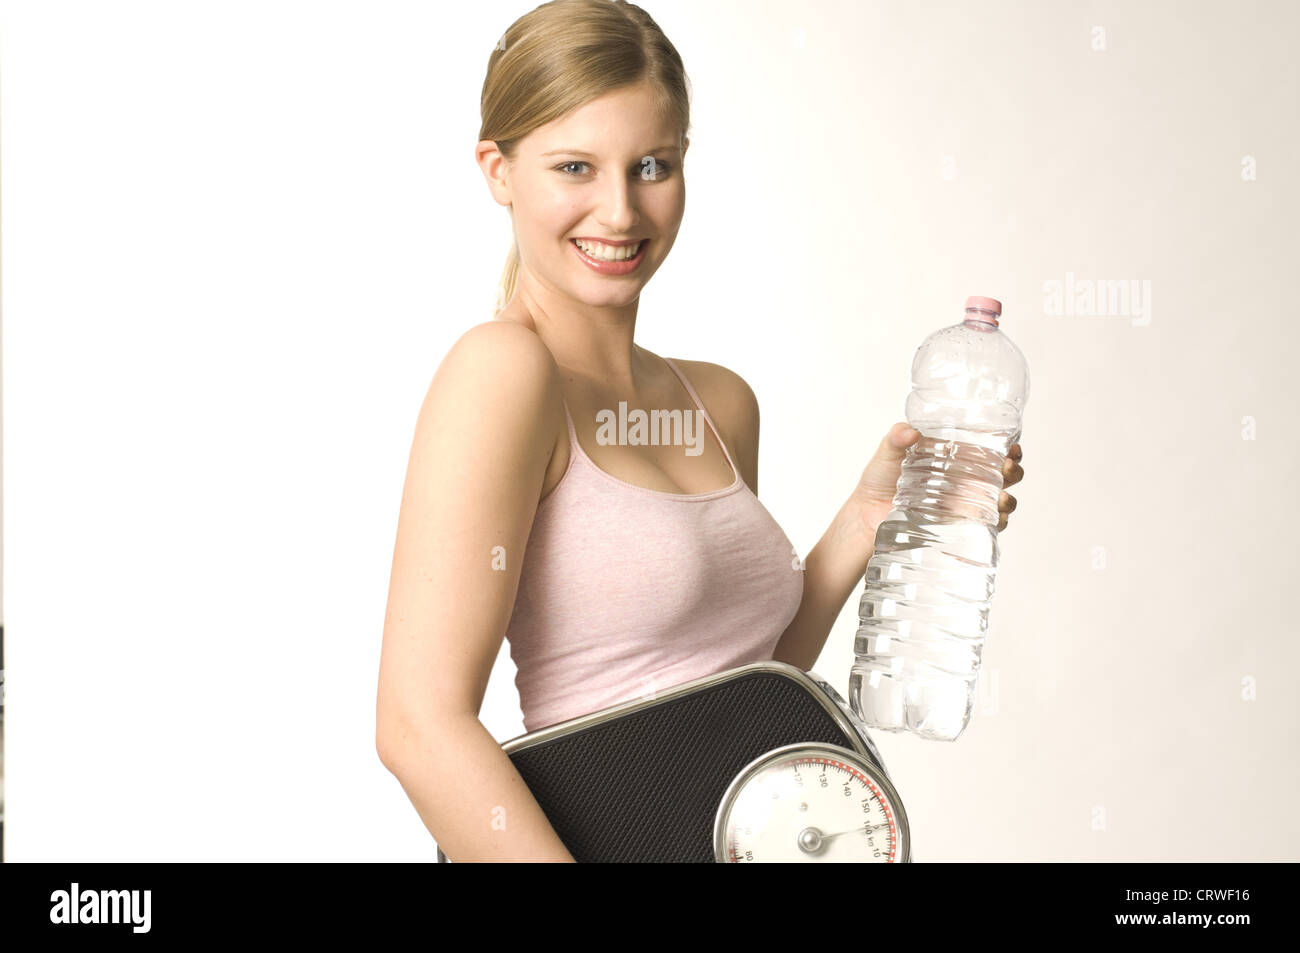 woman with scales and waterbottle Stock Photo